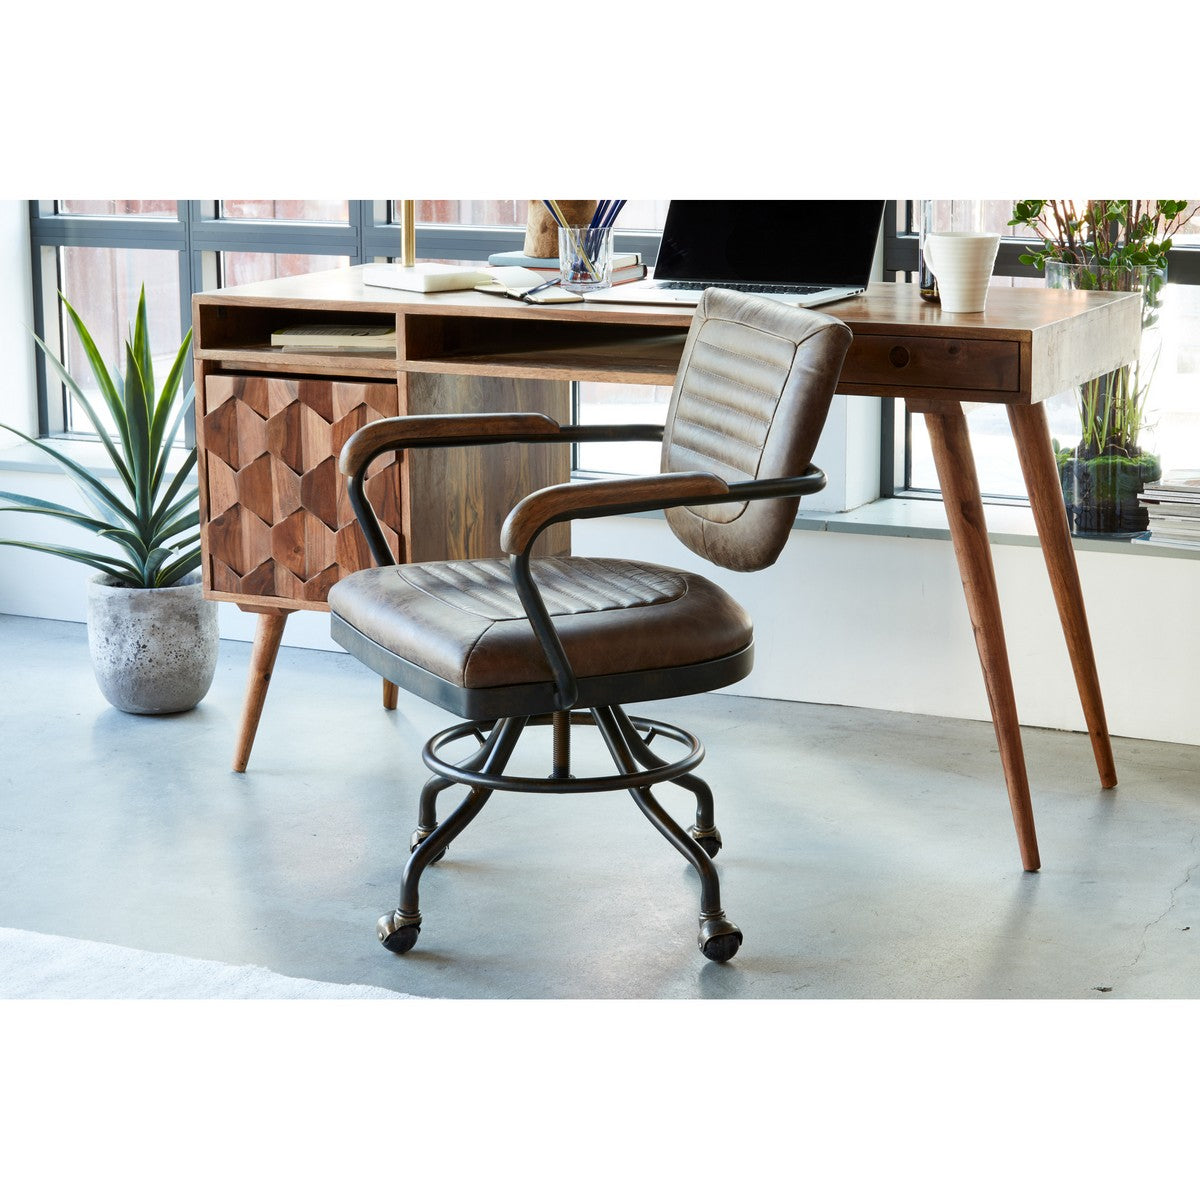 Moe's Home Collection Foster Swivel Desk Chair - Soft Brown - PK-1049-21 - Moe's Home Collection - Office Chairs - Minimal And Modern - 1